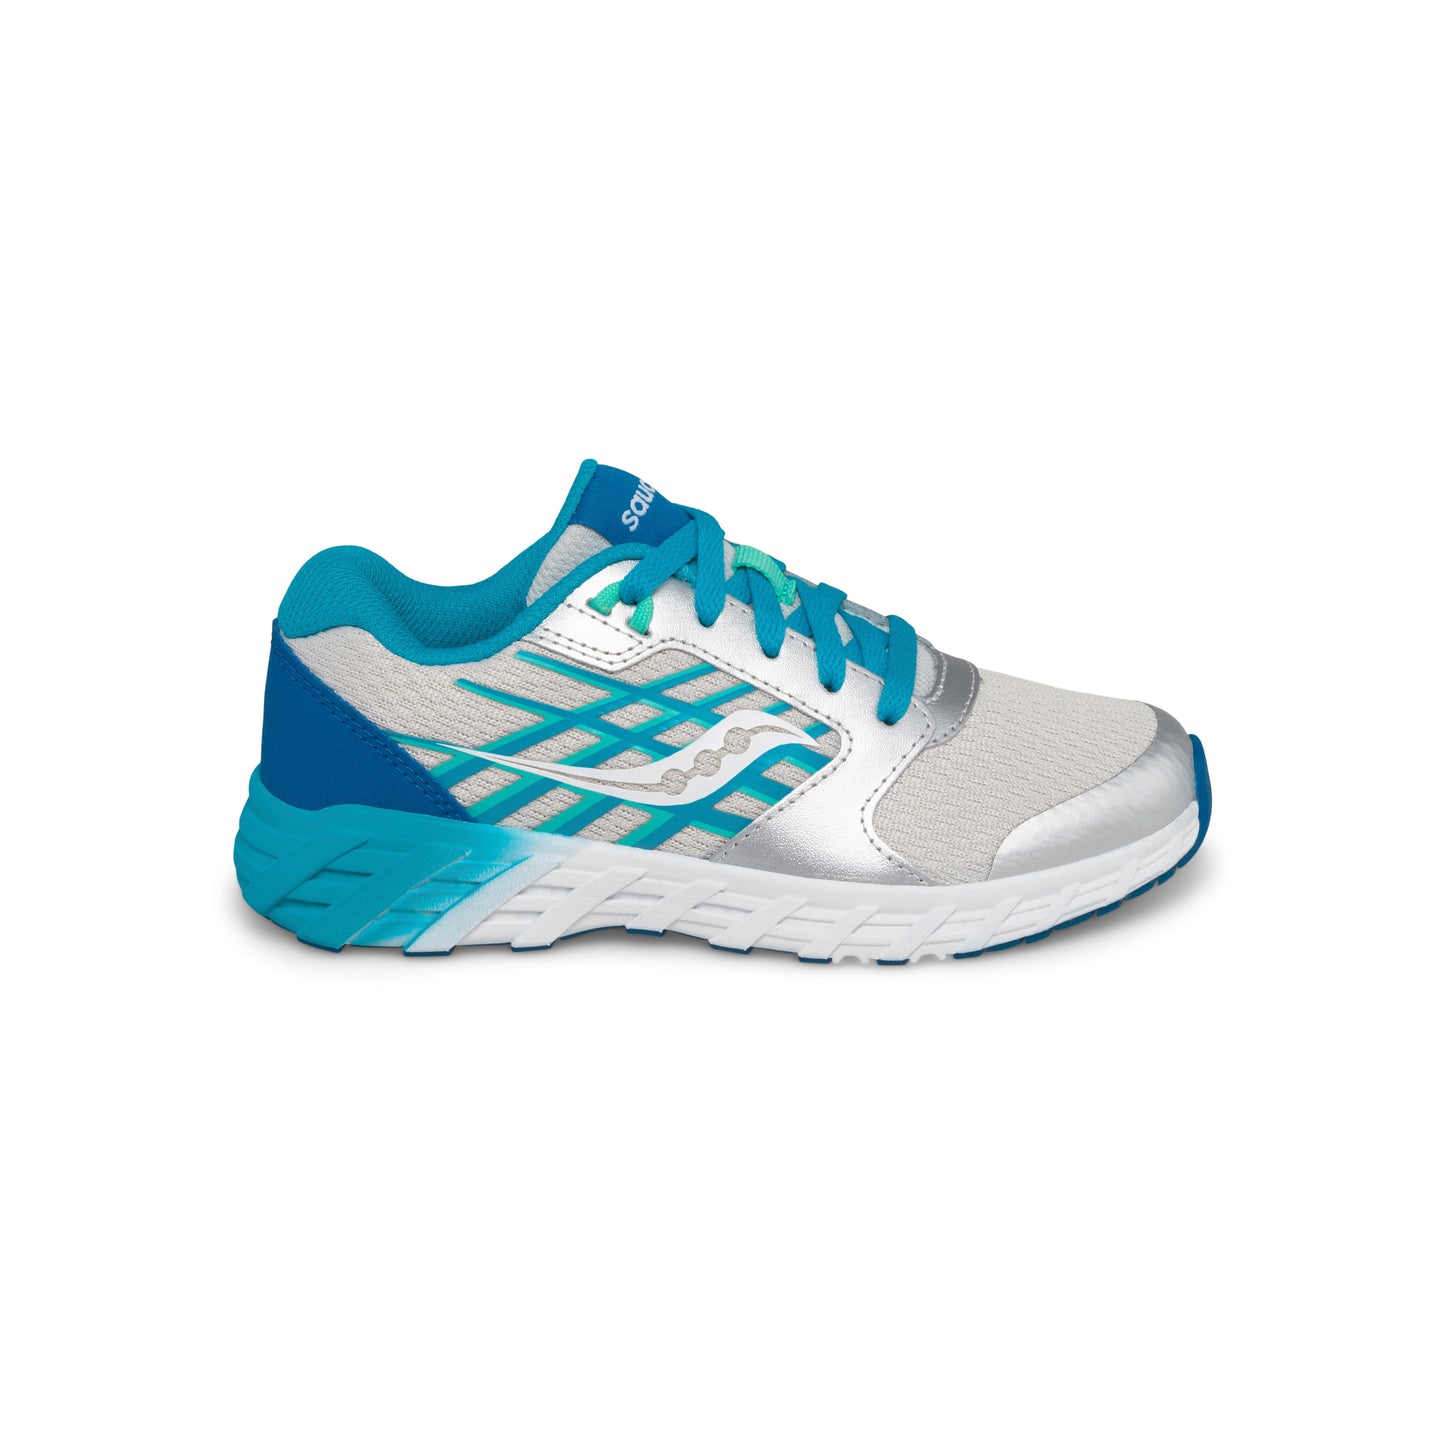 wind-20-sneaker-bigkid-turquoise-silver__Turquoise/Silver_2